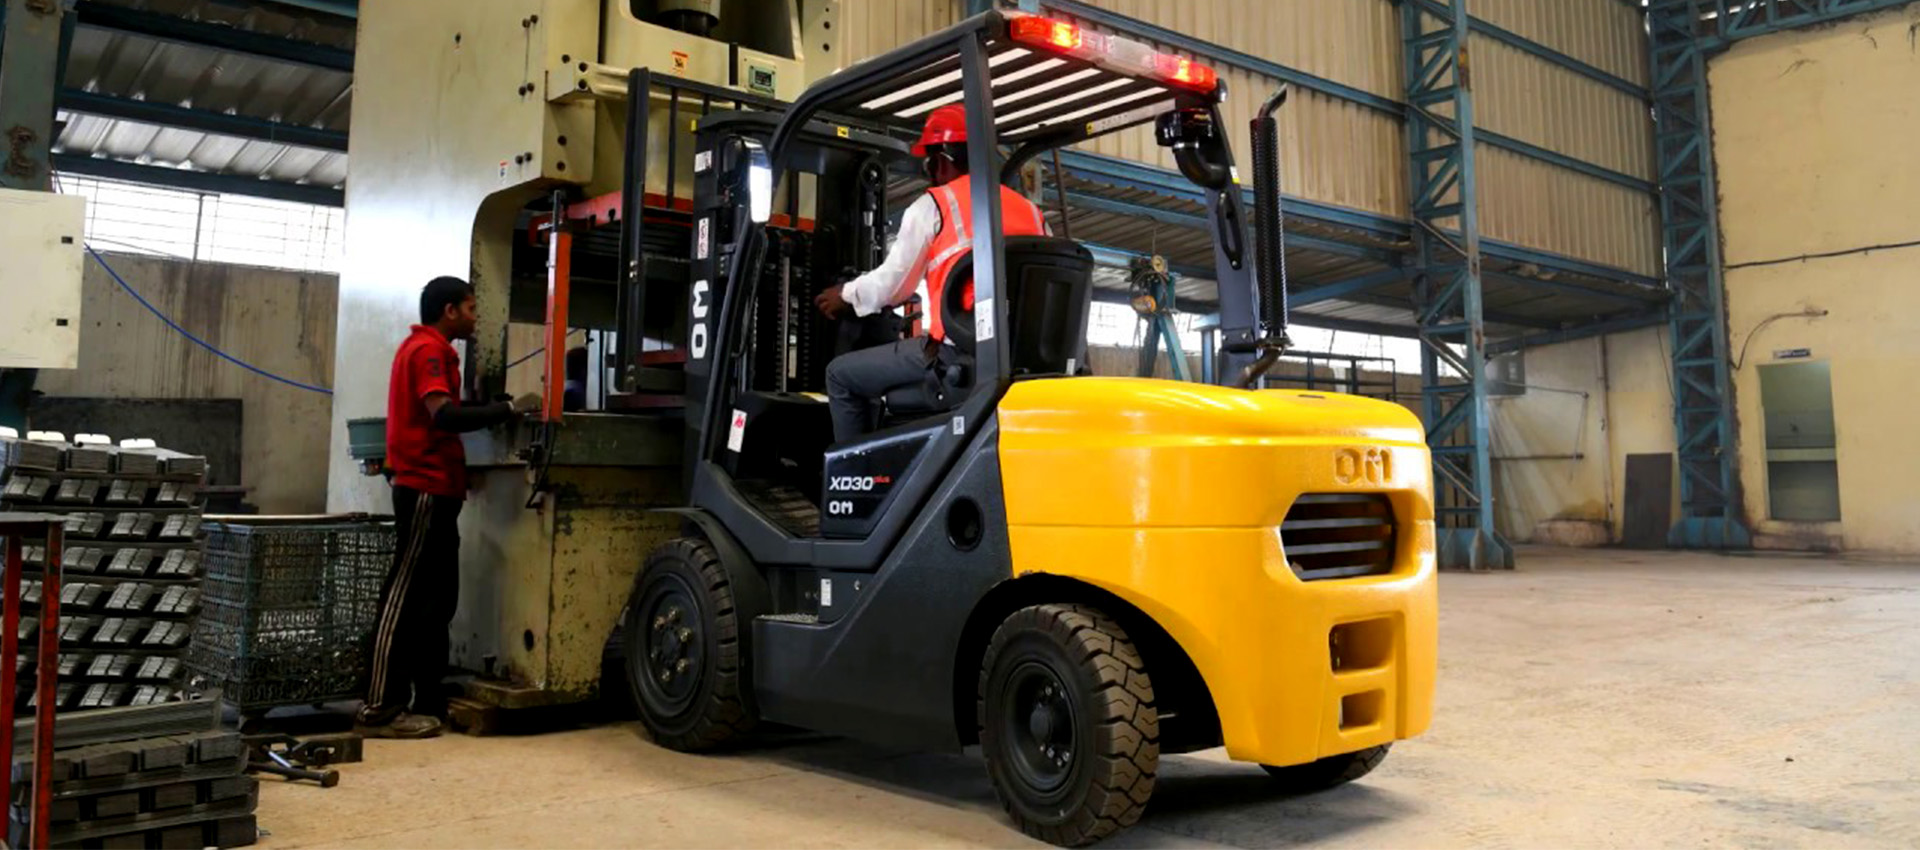 Want to Purchase a Pre-Owned Forklift? Here are a few things to keep in mind